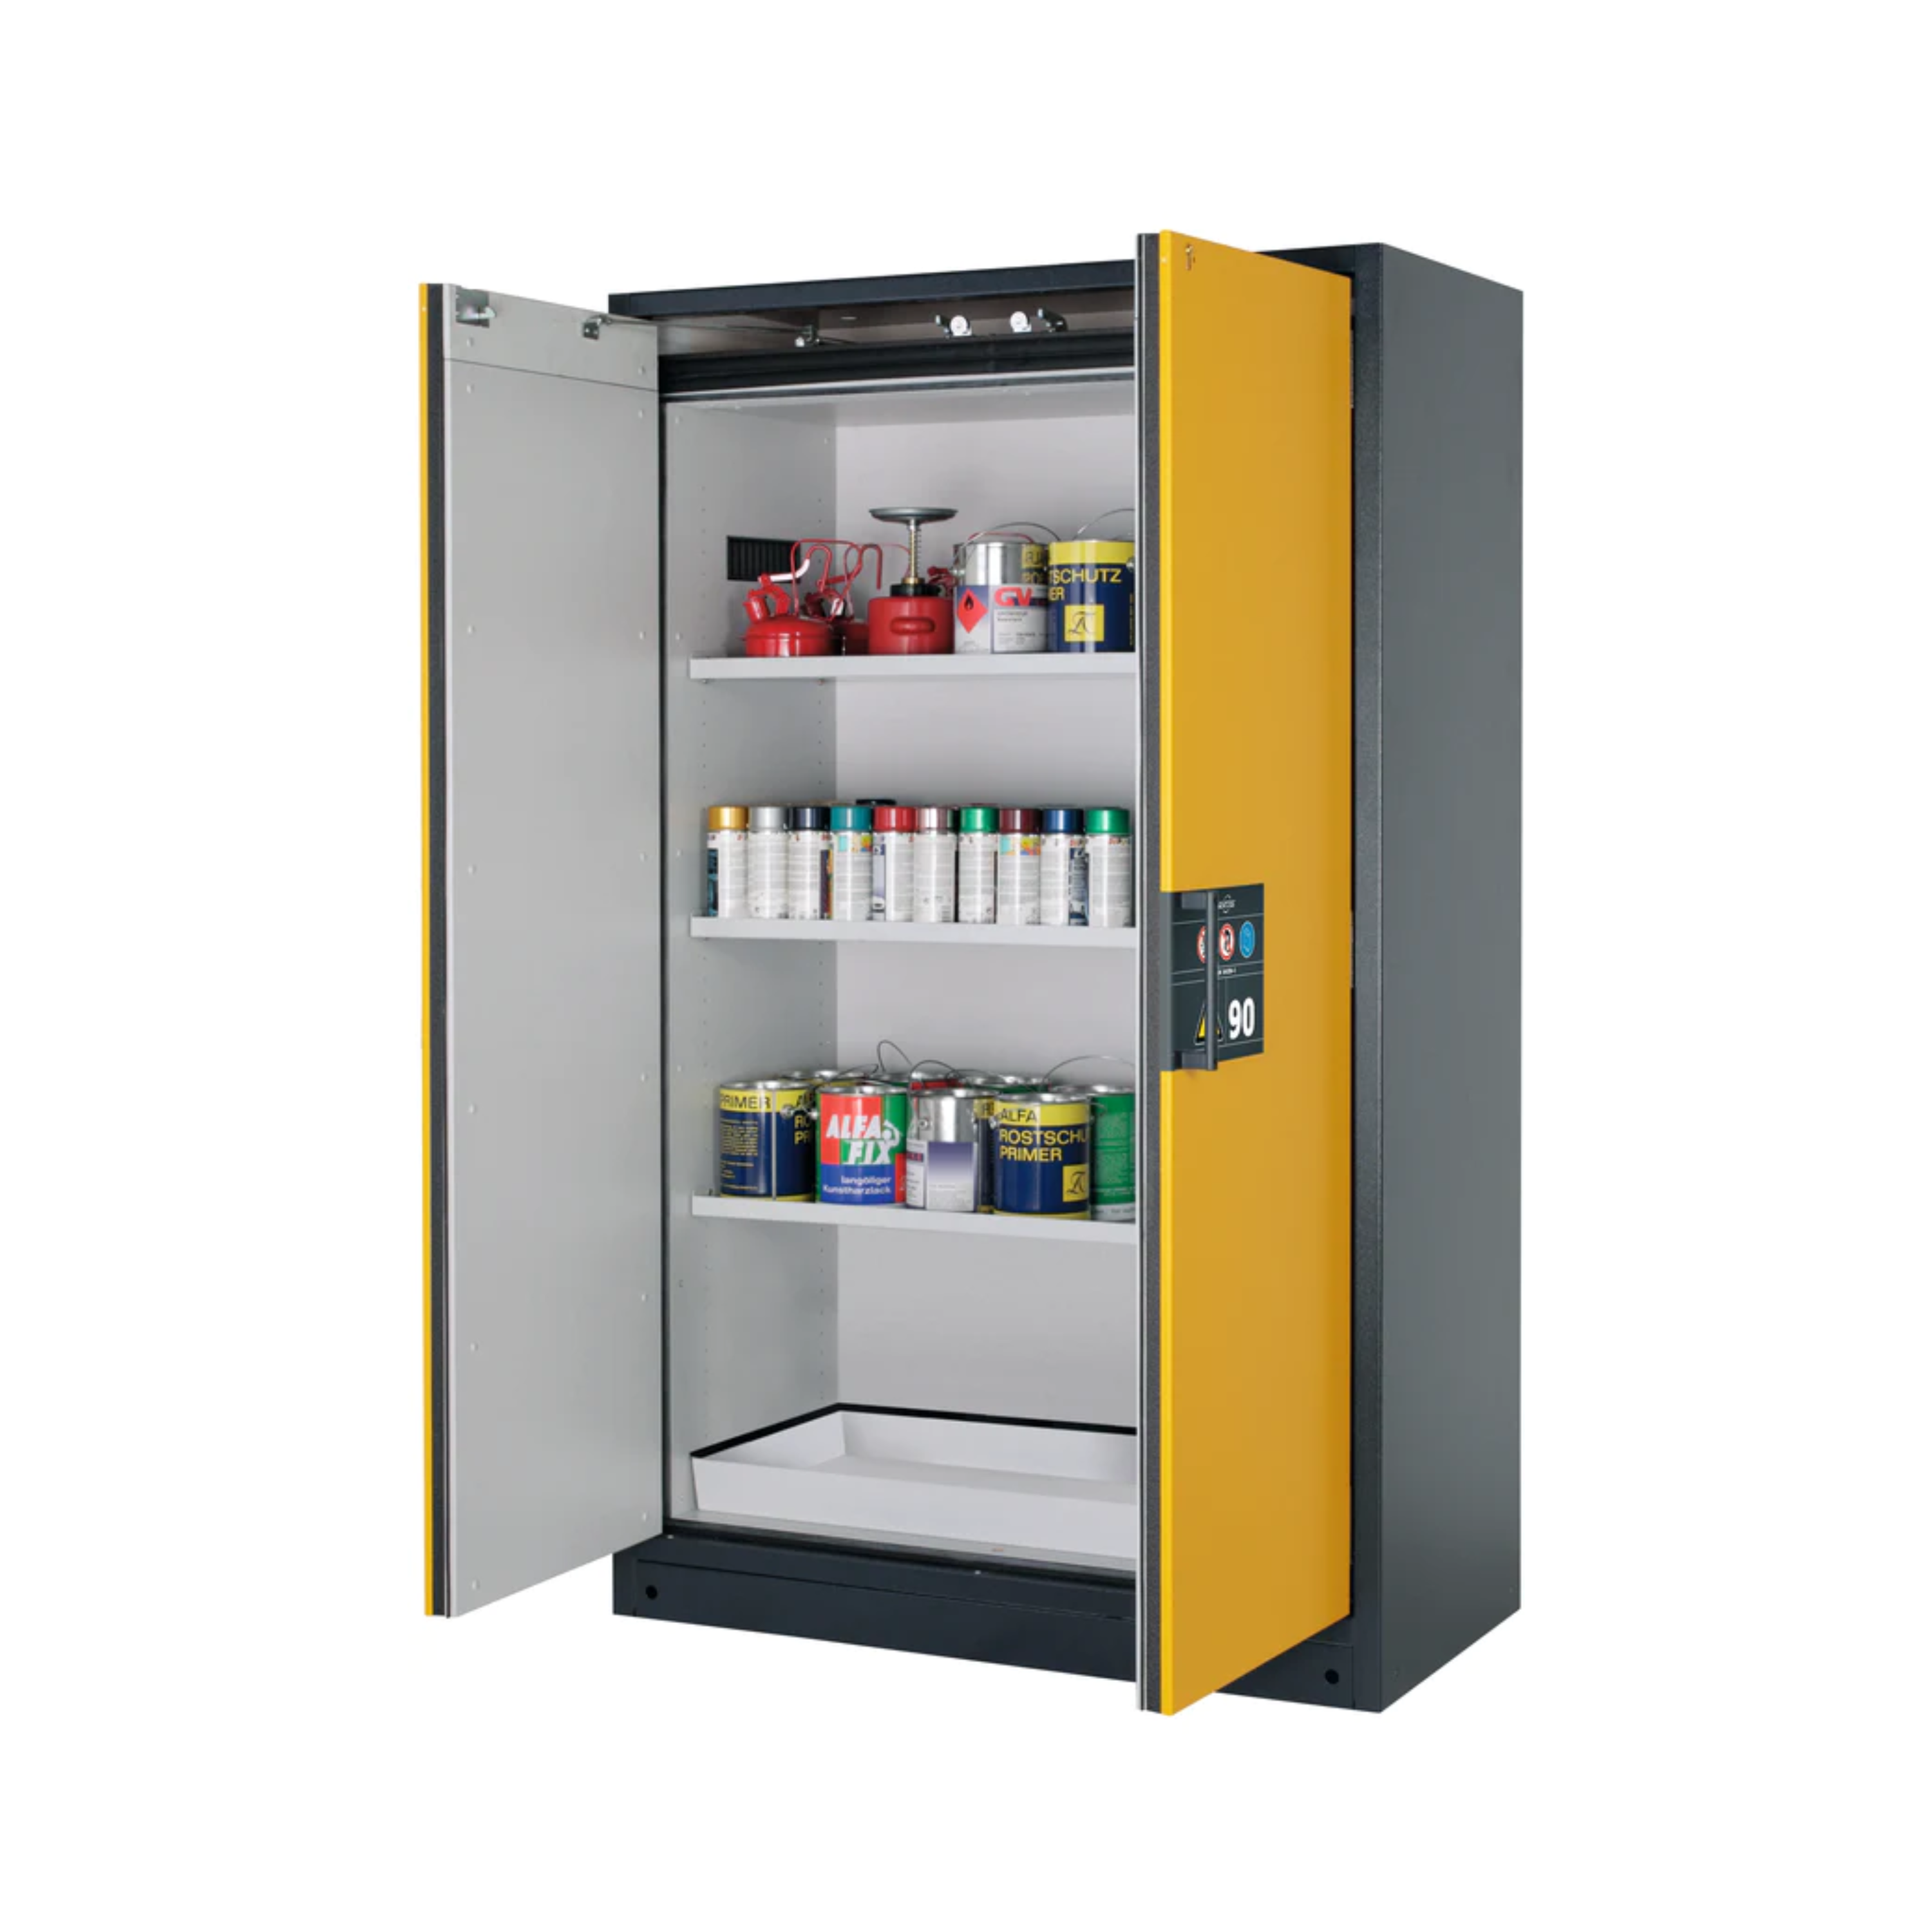 Type 90 safety storage cabinet Q-CLASSIC-90 model Q90.195.120 in warning yellow RAL 1004 with 3x shelf standard (sheet steel),